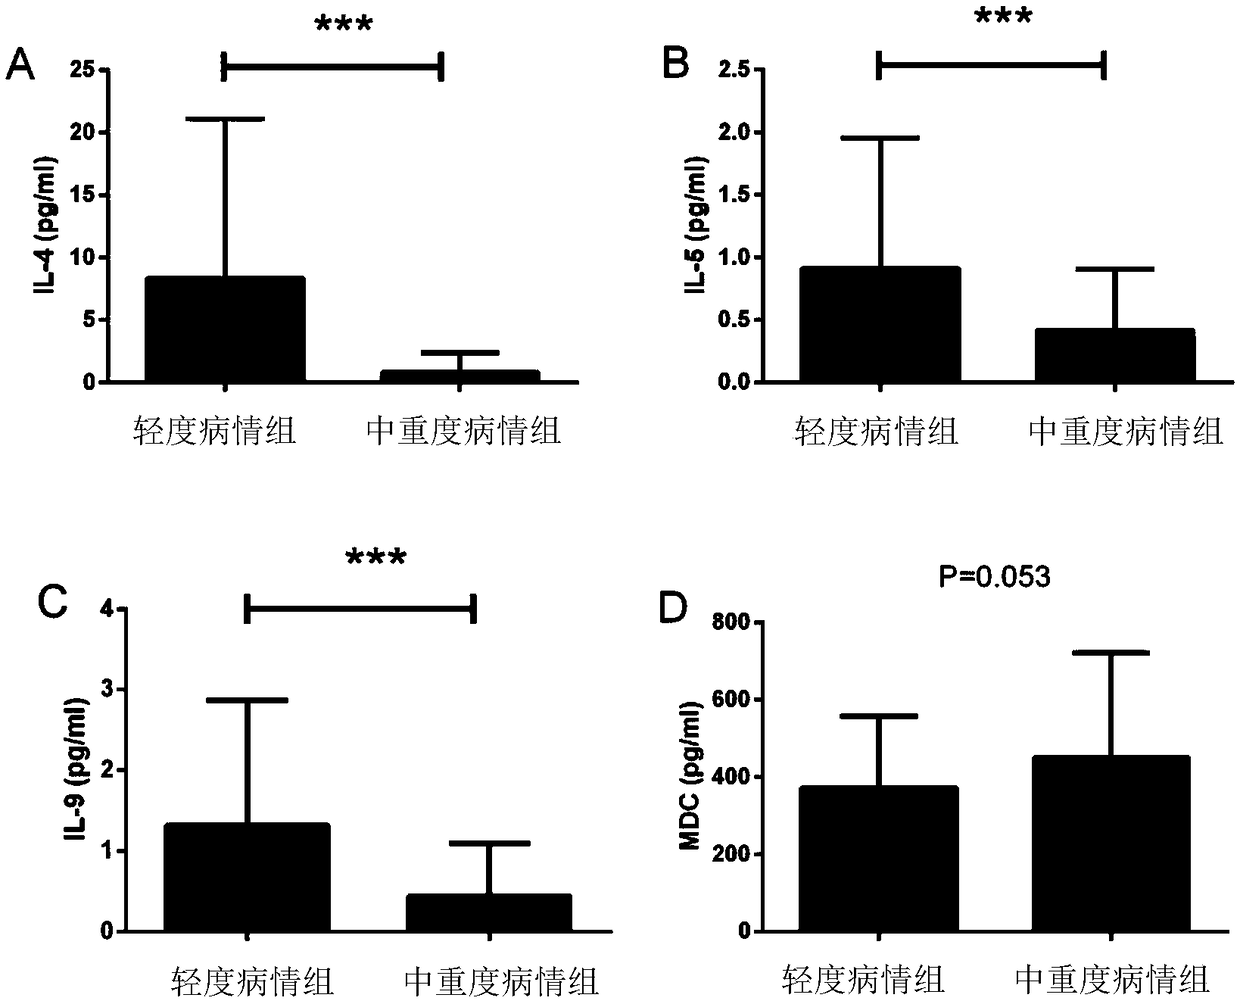 Application of serum inflammatory biomarkers in prevention and treatment of acute ischemic cerebral infarction